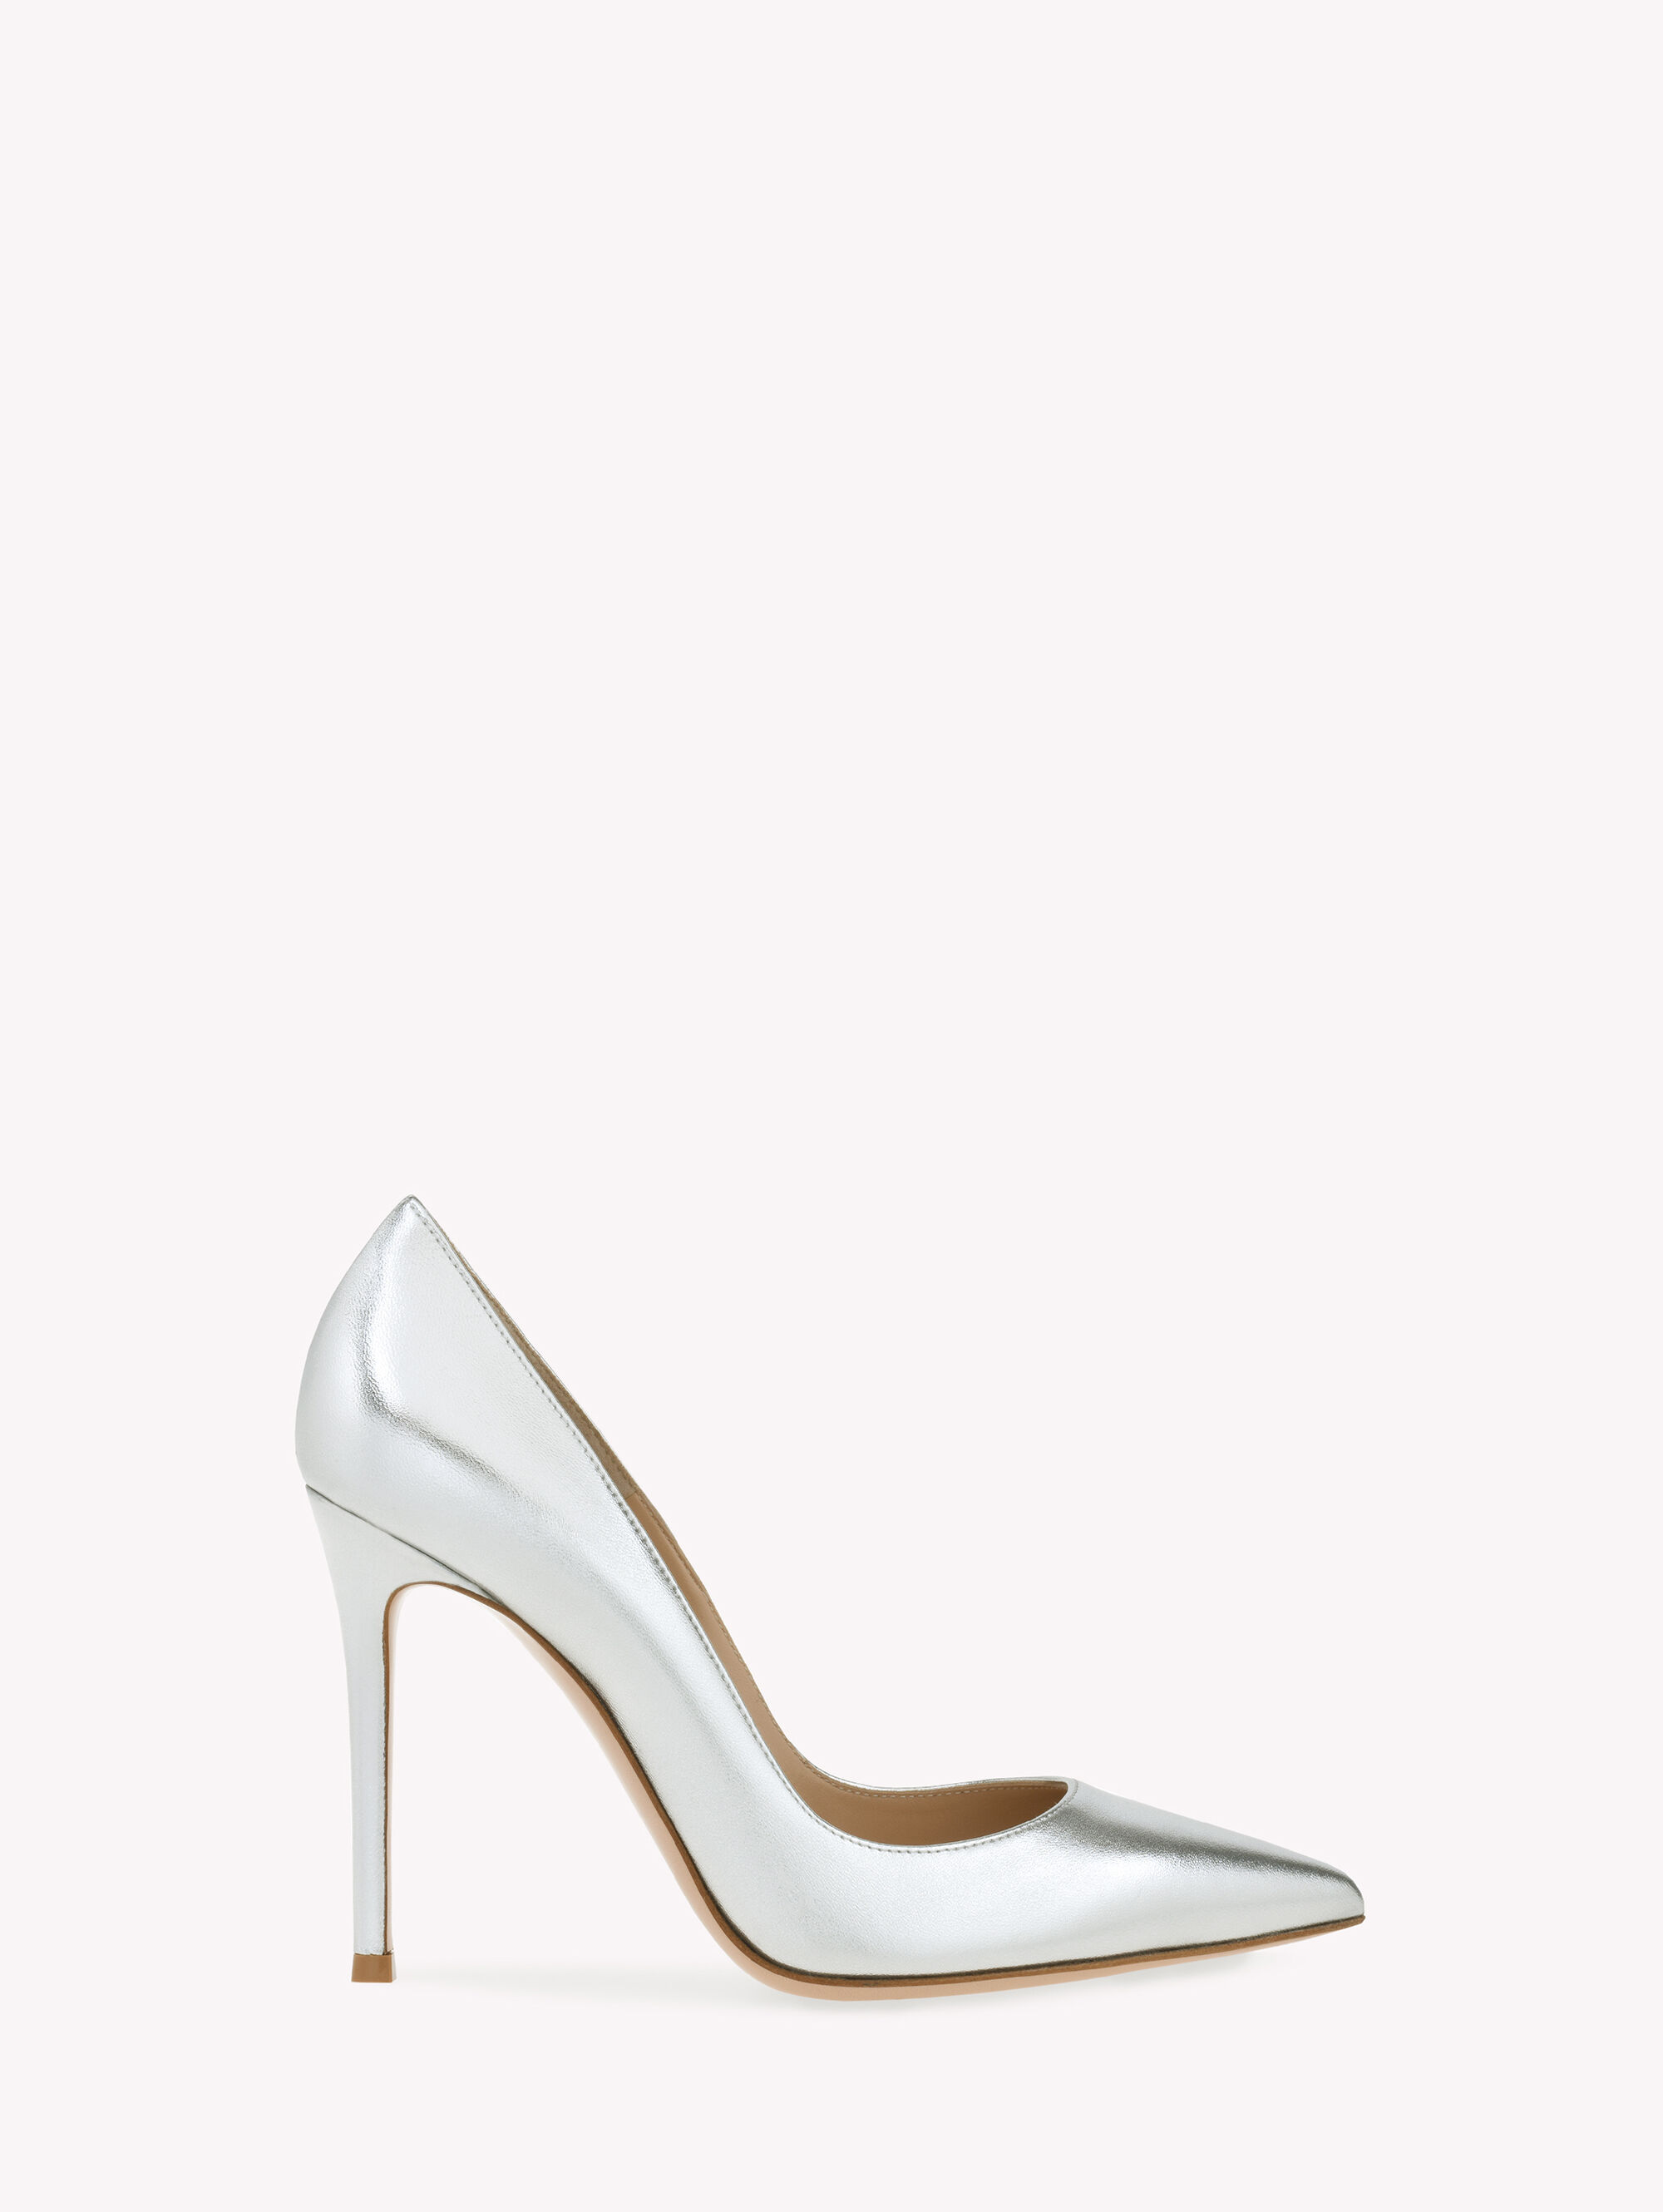 Iconic Shoes for Women: Signatures Collection | Gianvito Rossi